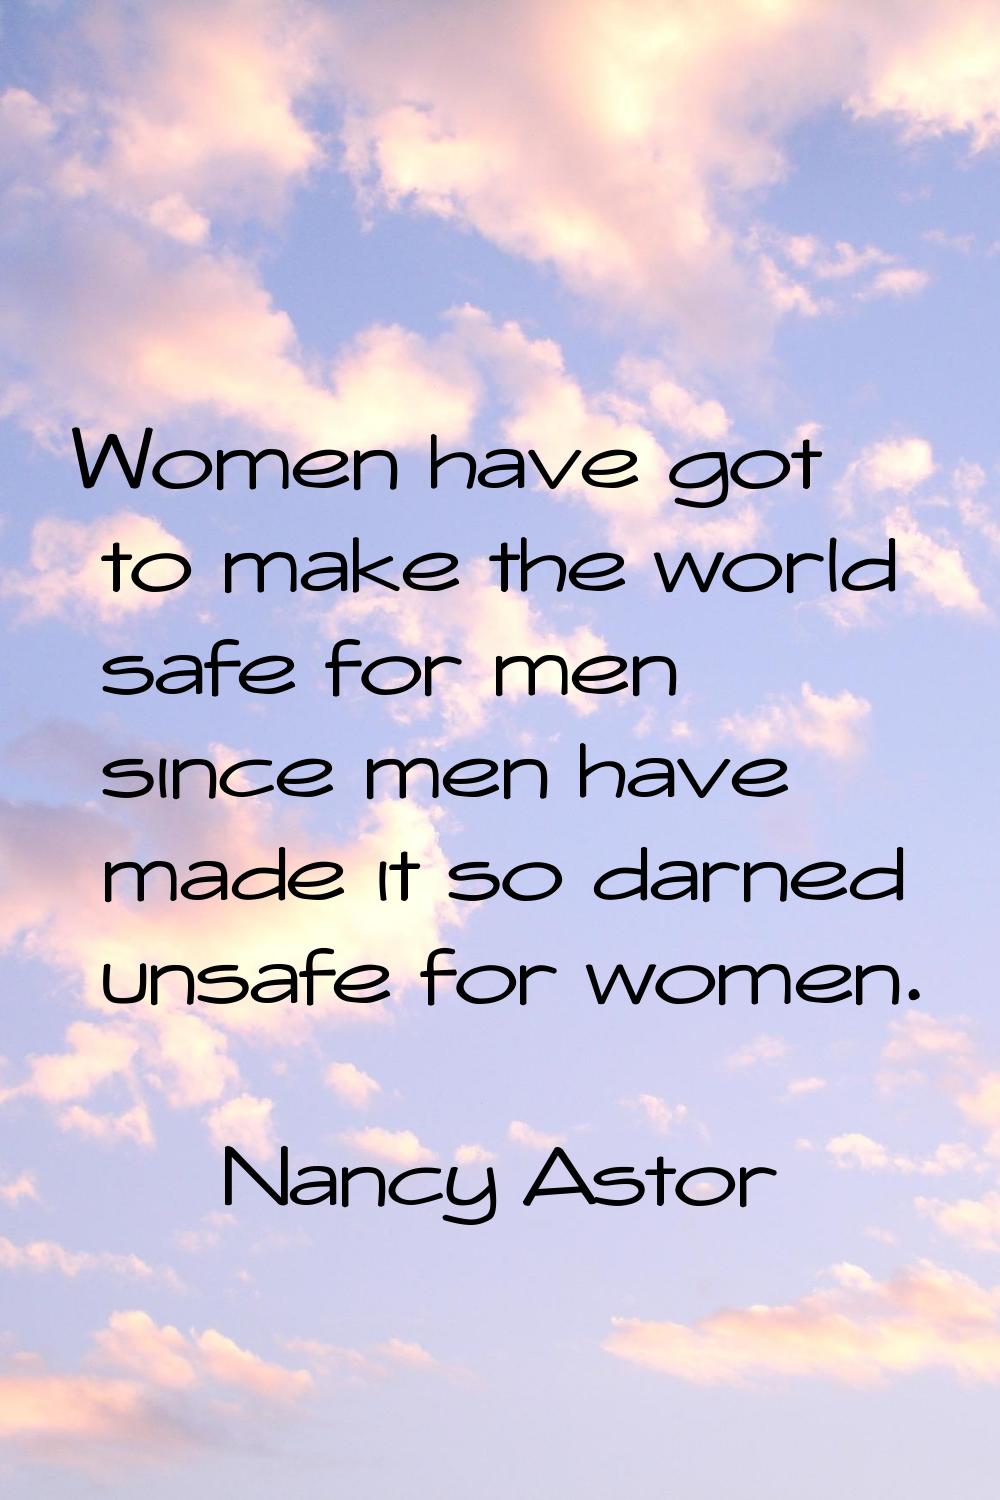 Women have got to make the world safe for men since men have made it so darned unsafe for women.